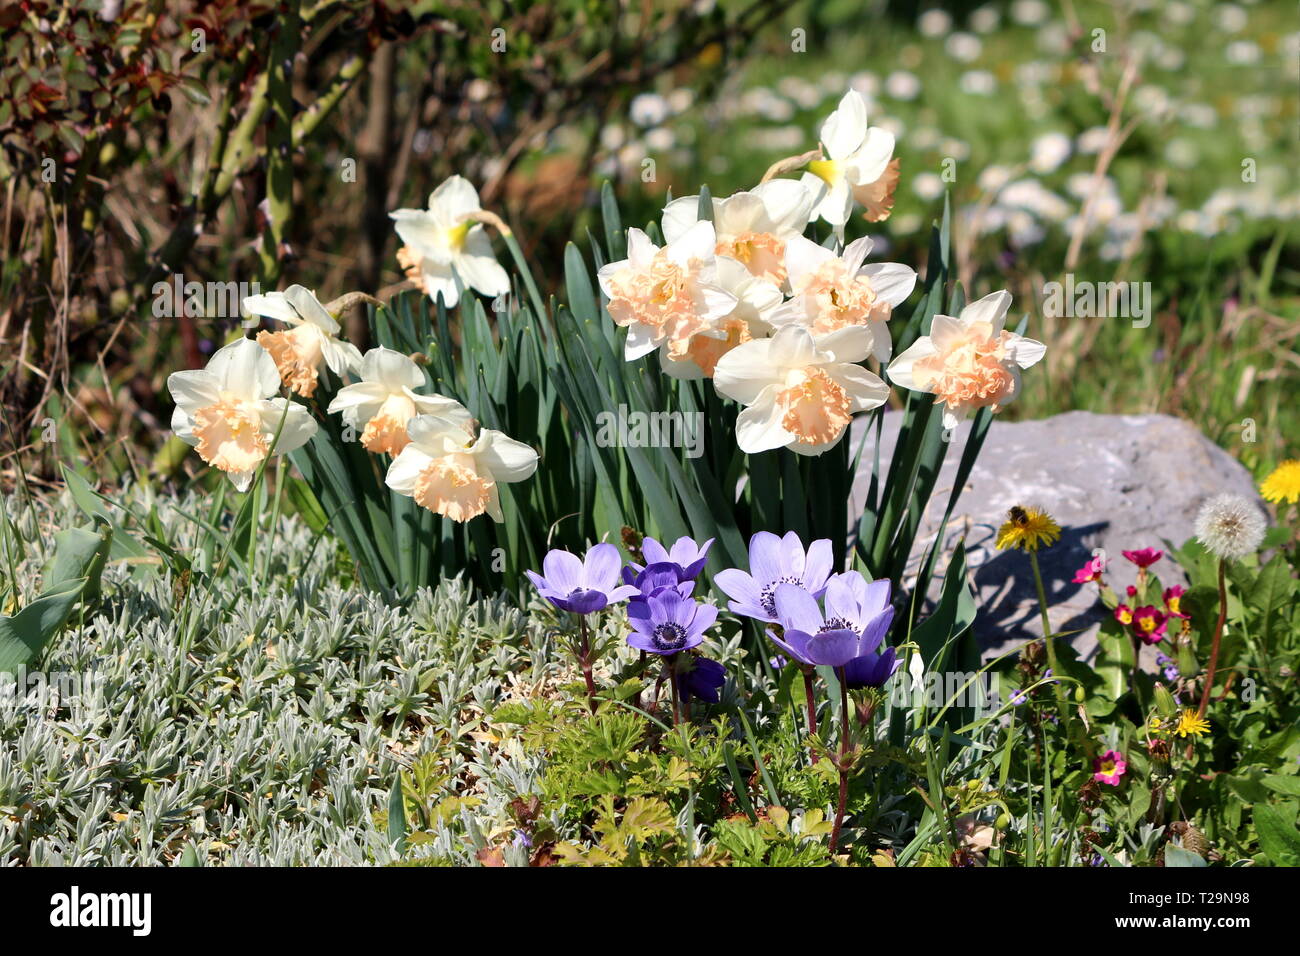 Narcissus or Daffodil or Daffadowndilly or Jonquil perennial herbaceous bulbiferous geophytes flowering plants with white flowers and pink center Stock Photo